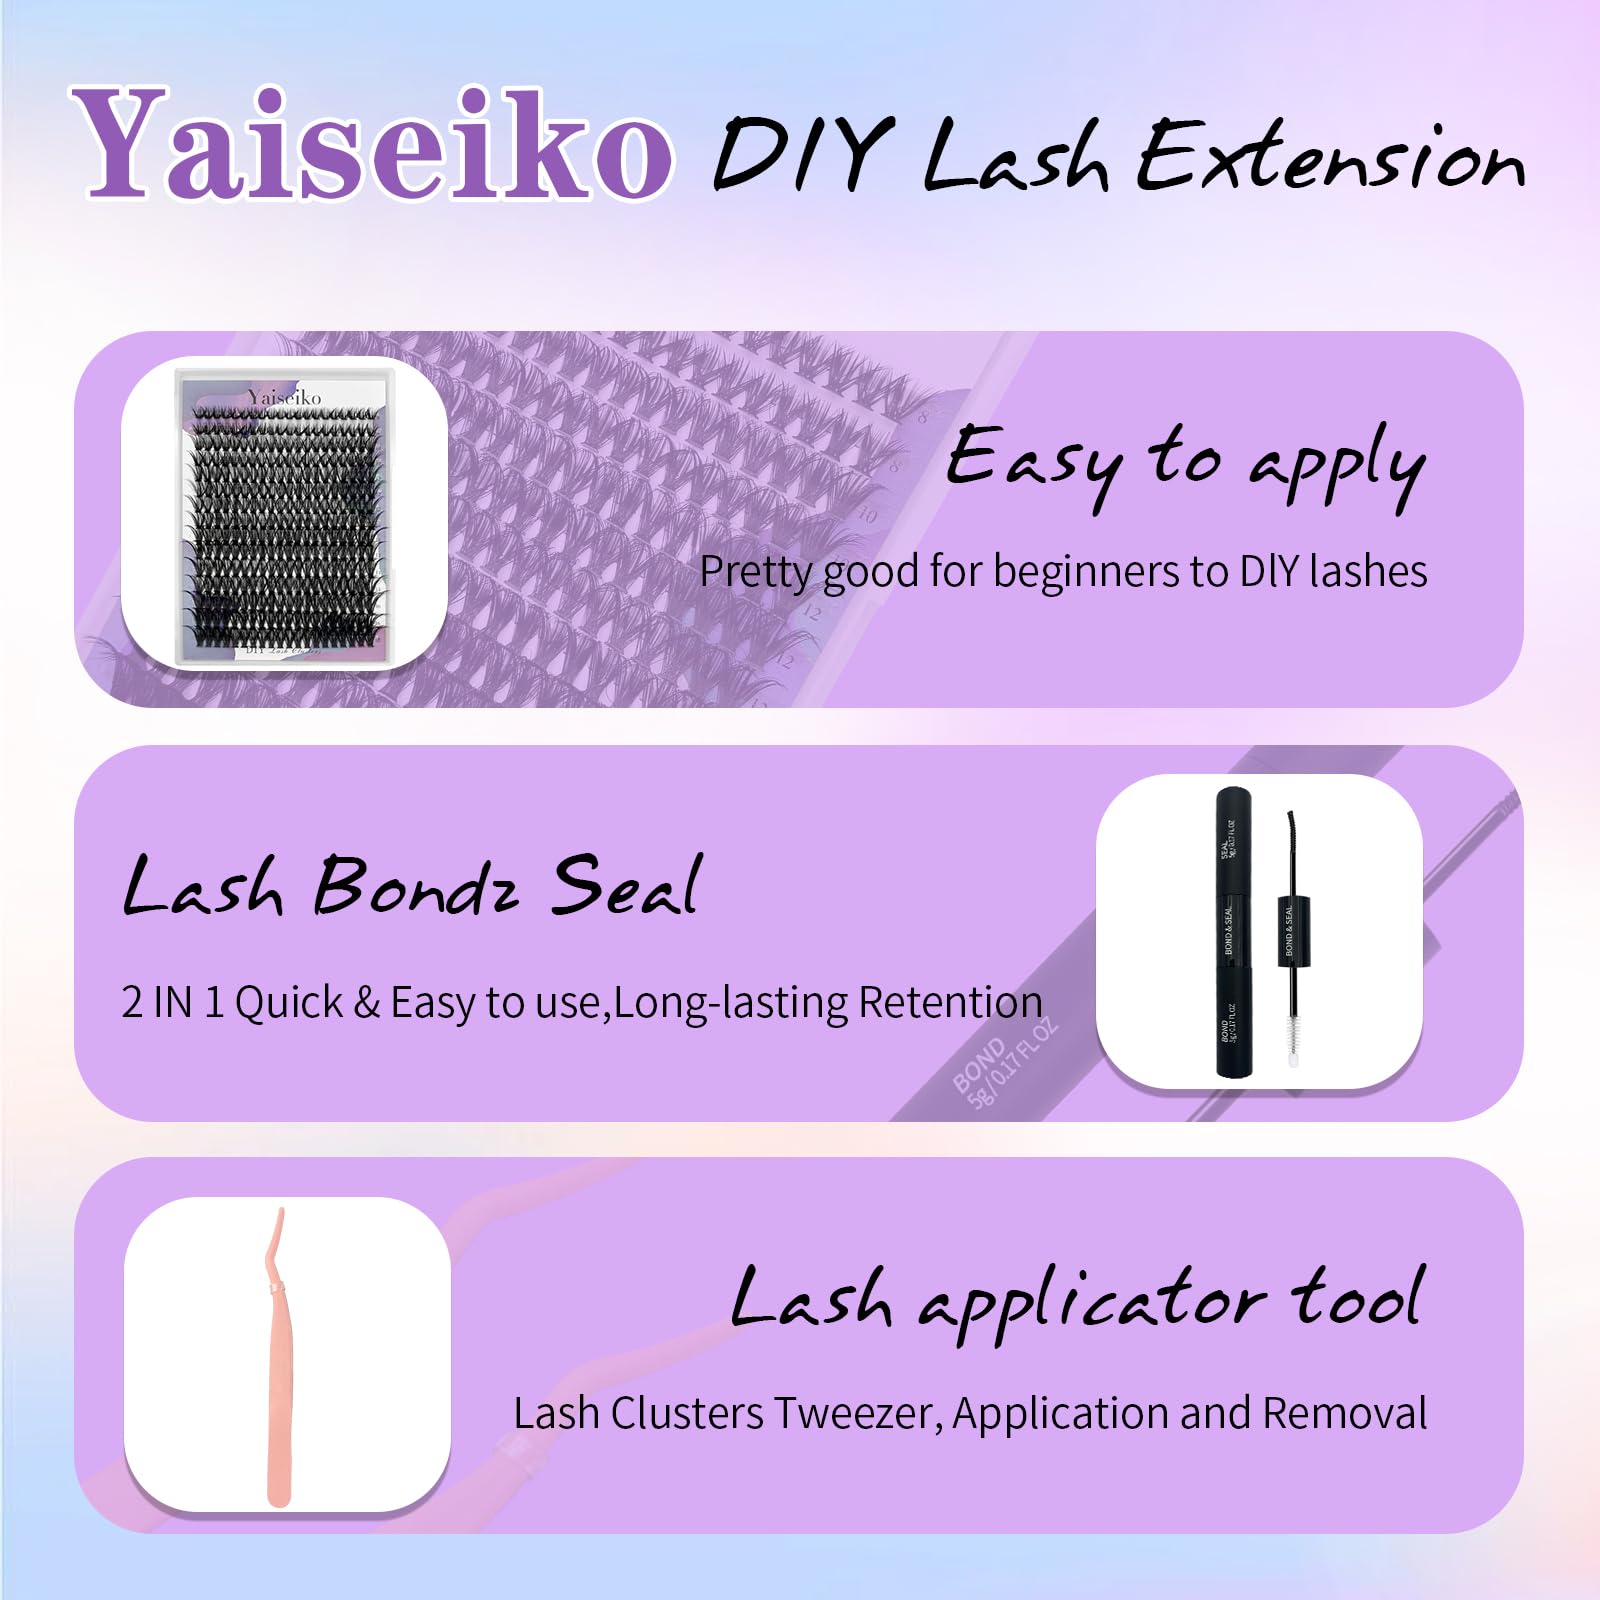 Lash Extension Kit 50D Fluffy Cluster Eyelash Extensions Kit 300 Pcs DIY Individual Lashes Kit with Lash Bond and Seal and Lashes Tweezers 8-16mm Mix D Curl Wispy False Eyelashes Pack, by Yaiseiko